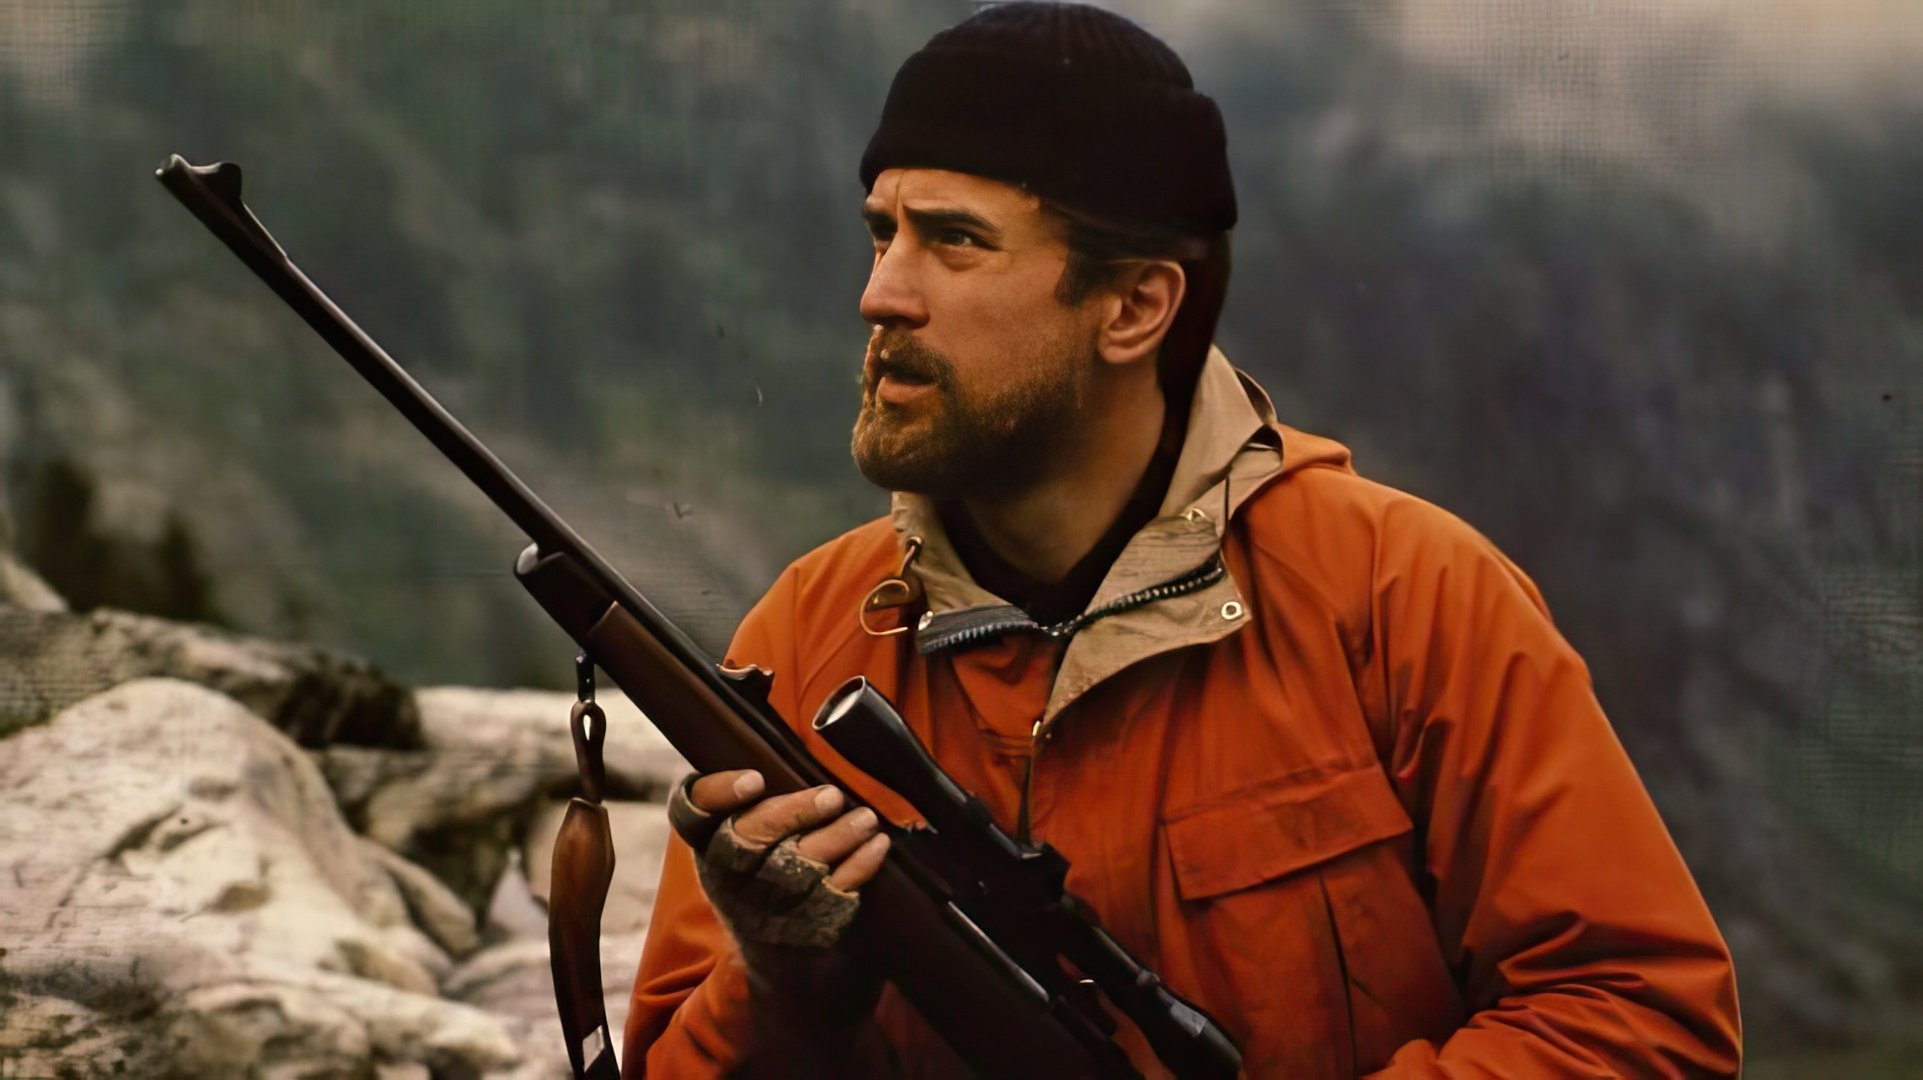 A scene from the movie 'The Deer Hunter'